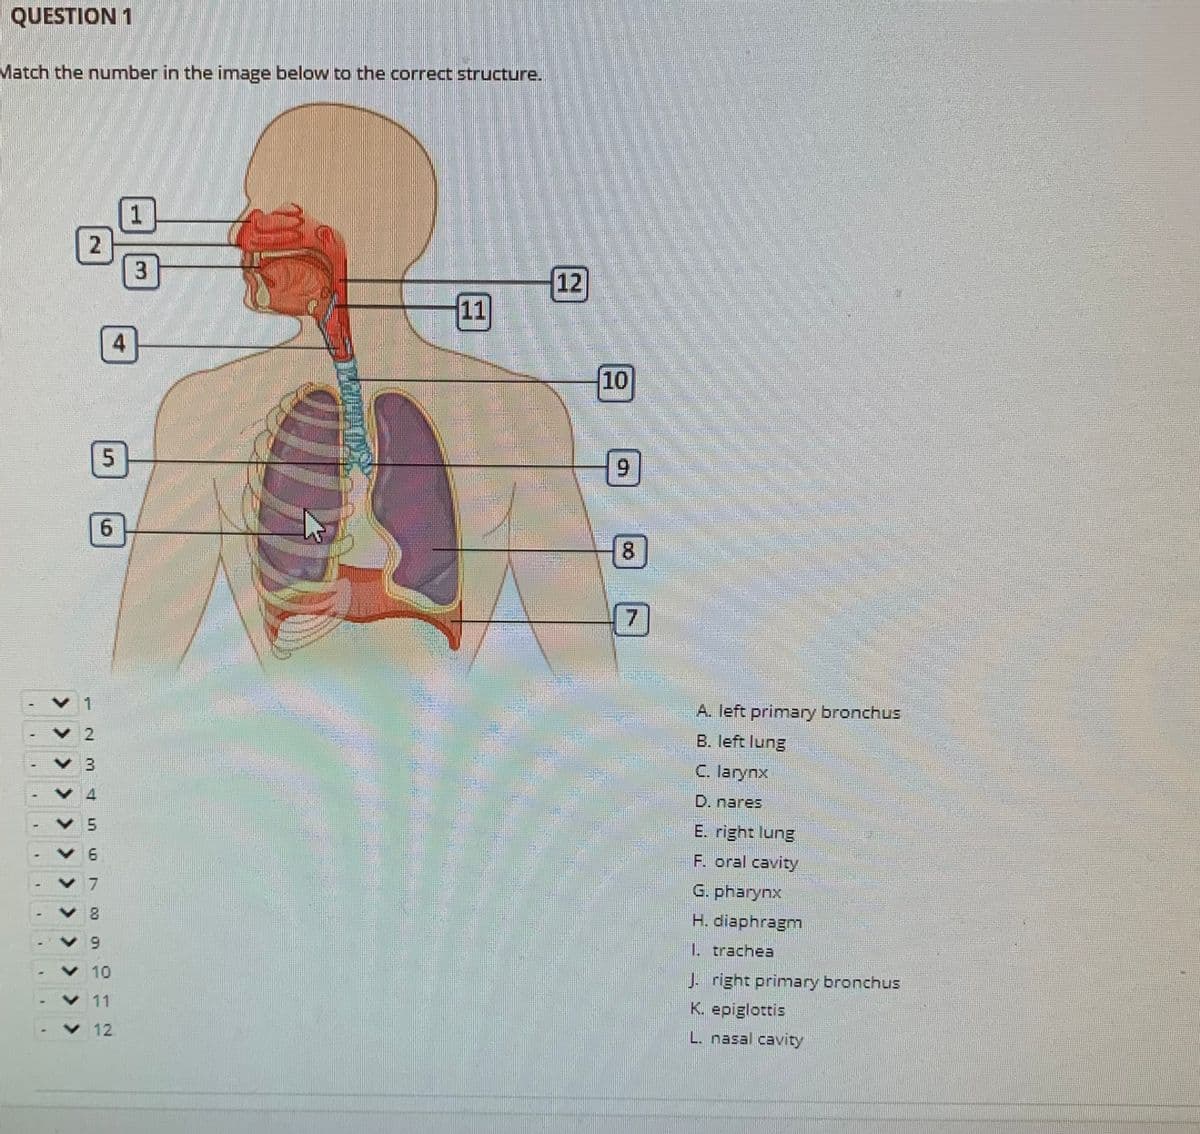 QUESTION 1
Match the number in the image below to the correct structure.
1
2
3
12
11
4
10
6.
9.
8.
7
A. left primary bronchus
B. left lung
C. larynx
D. nares
E. right lung
F. oral cavity
7.
G. pharynx
H. diaphragm
1. trachea
10
Jright primary bronchus
11
K. epiglottis
12
L. nasal cavity
> >>>> >>>>>>>
